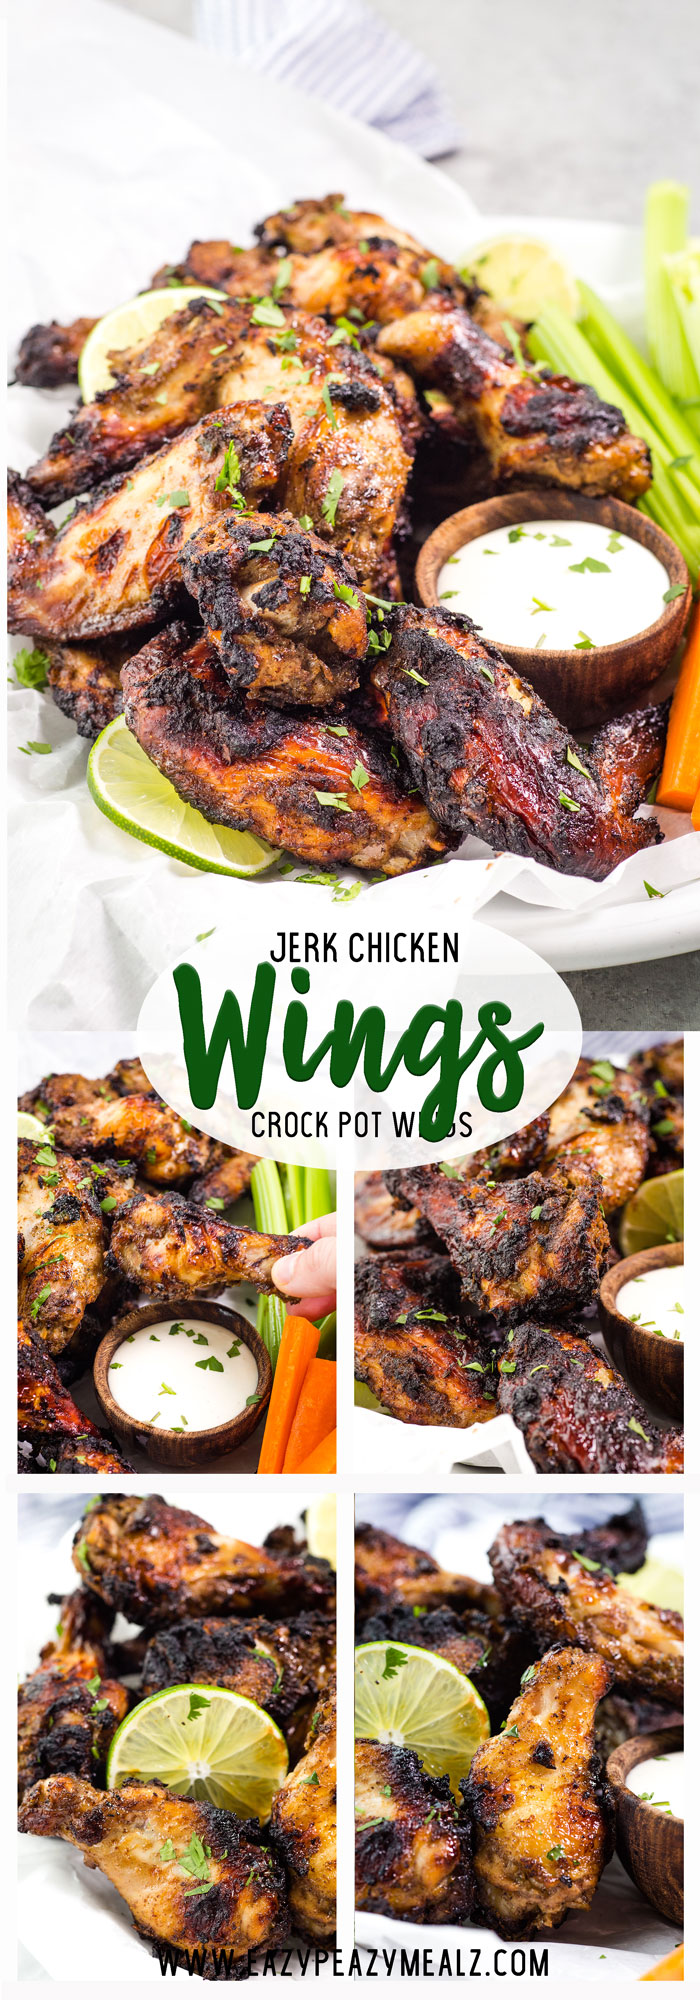 Jerk chicken wings made in the slow cooker